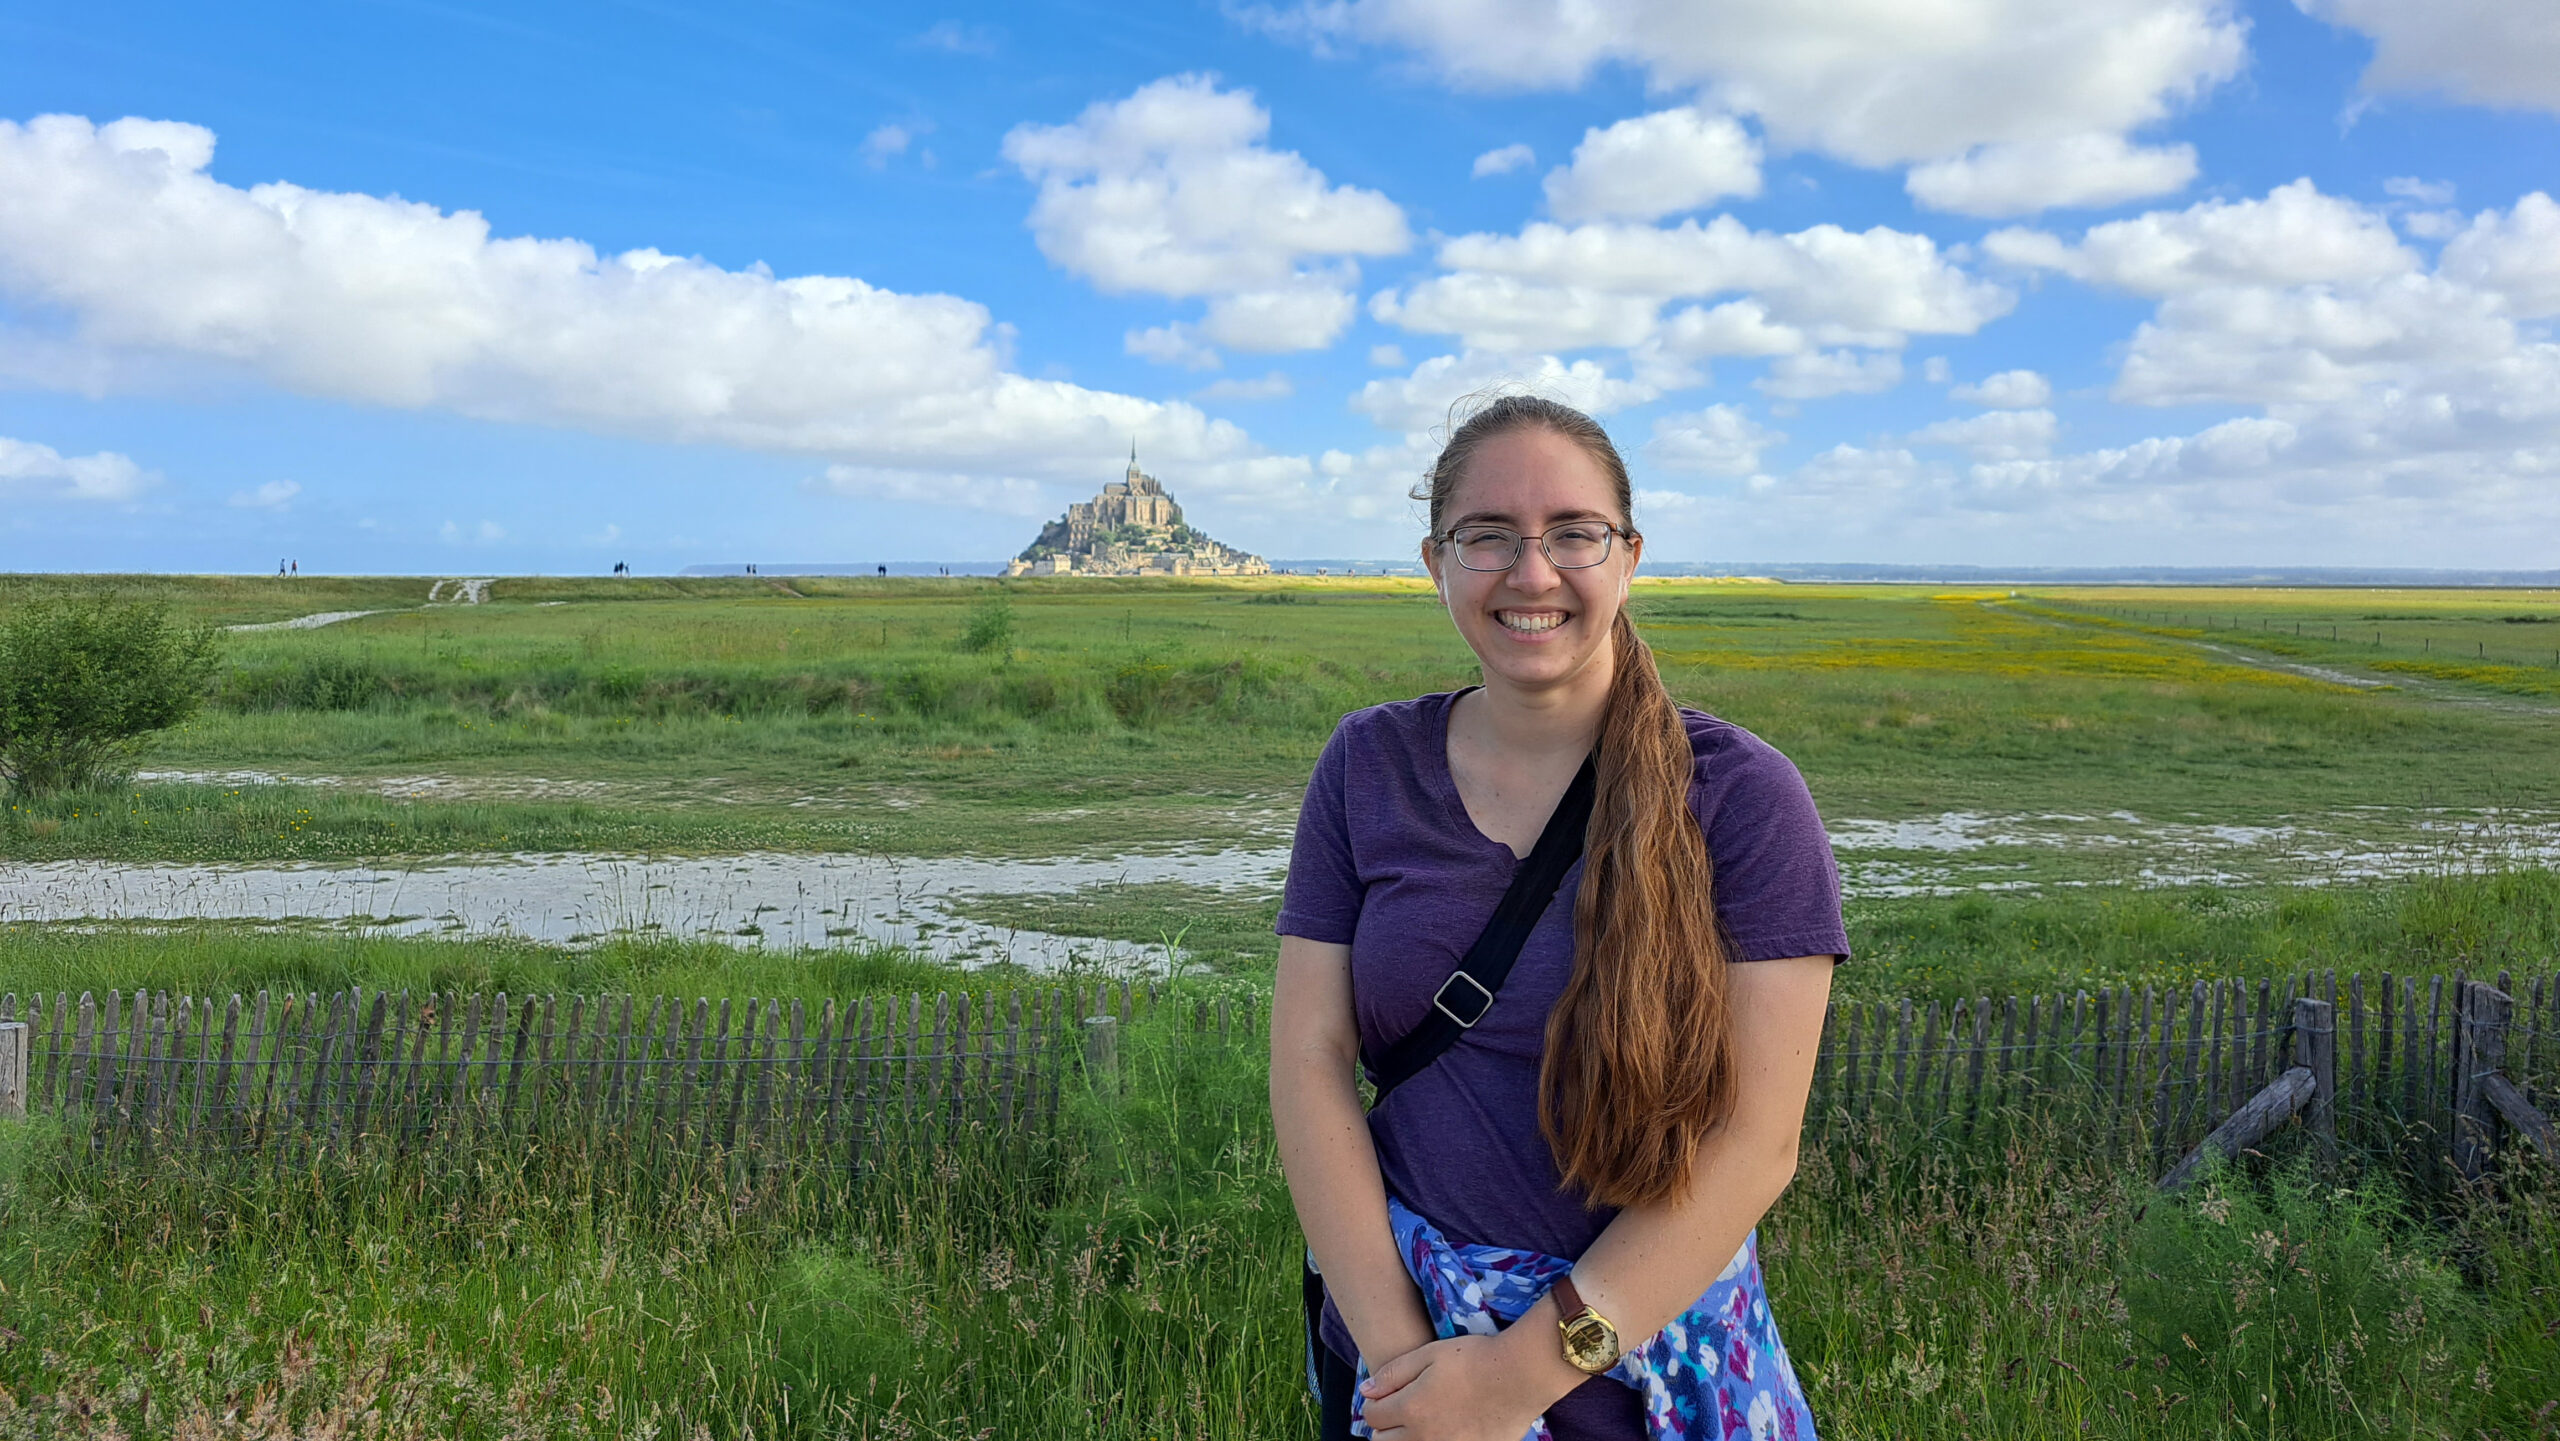 ASC's Rosie Maloney in front of a marsh and castle.